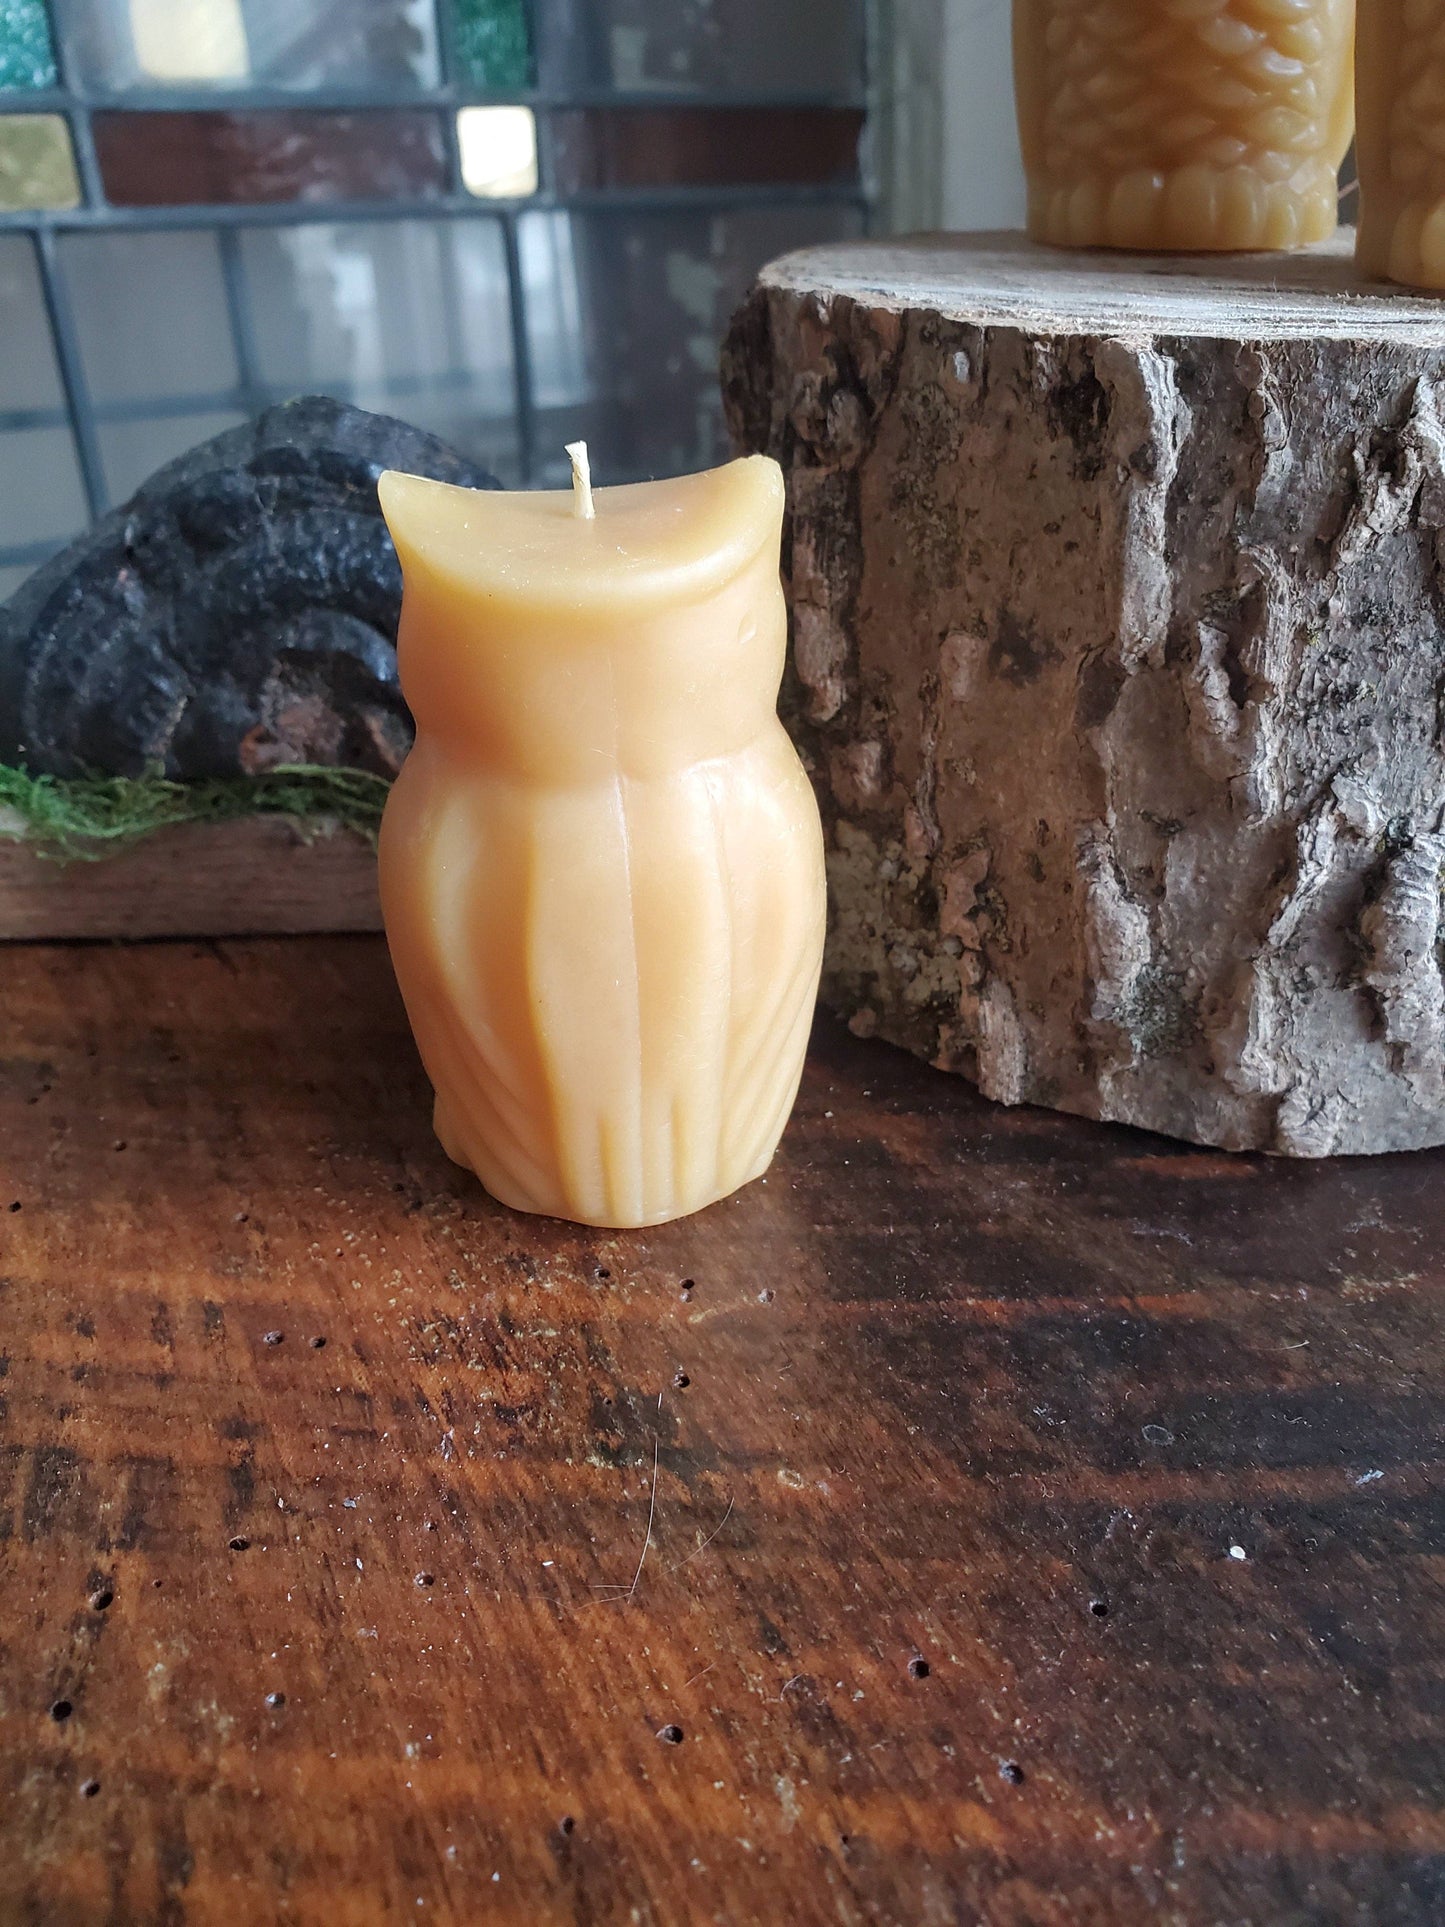 Owl Shaped Beeswax Candle